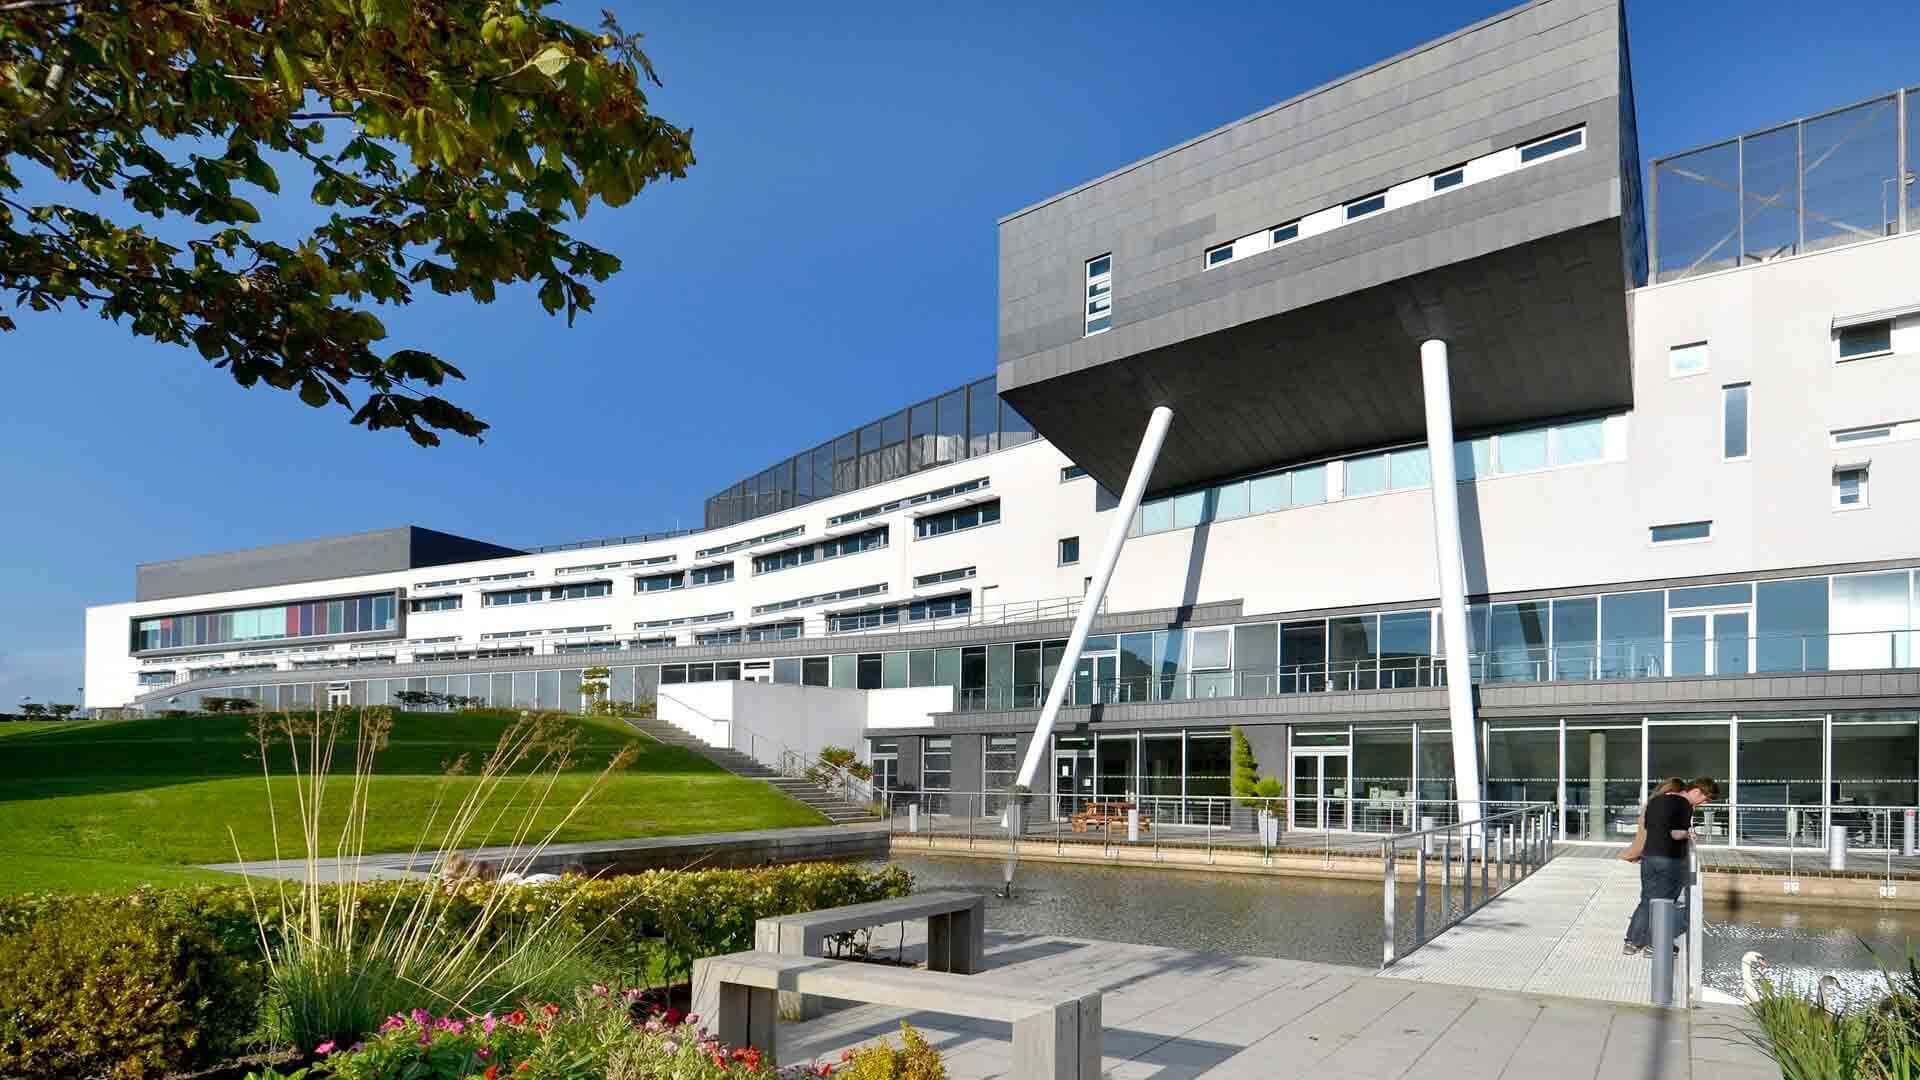 Edinburgh, Scotland-Based Queen Margaret University Deploys YuJa Panorama to Deliver Accessible and Inclusive Learning to All